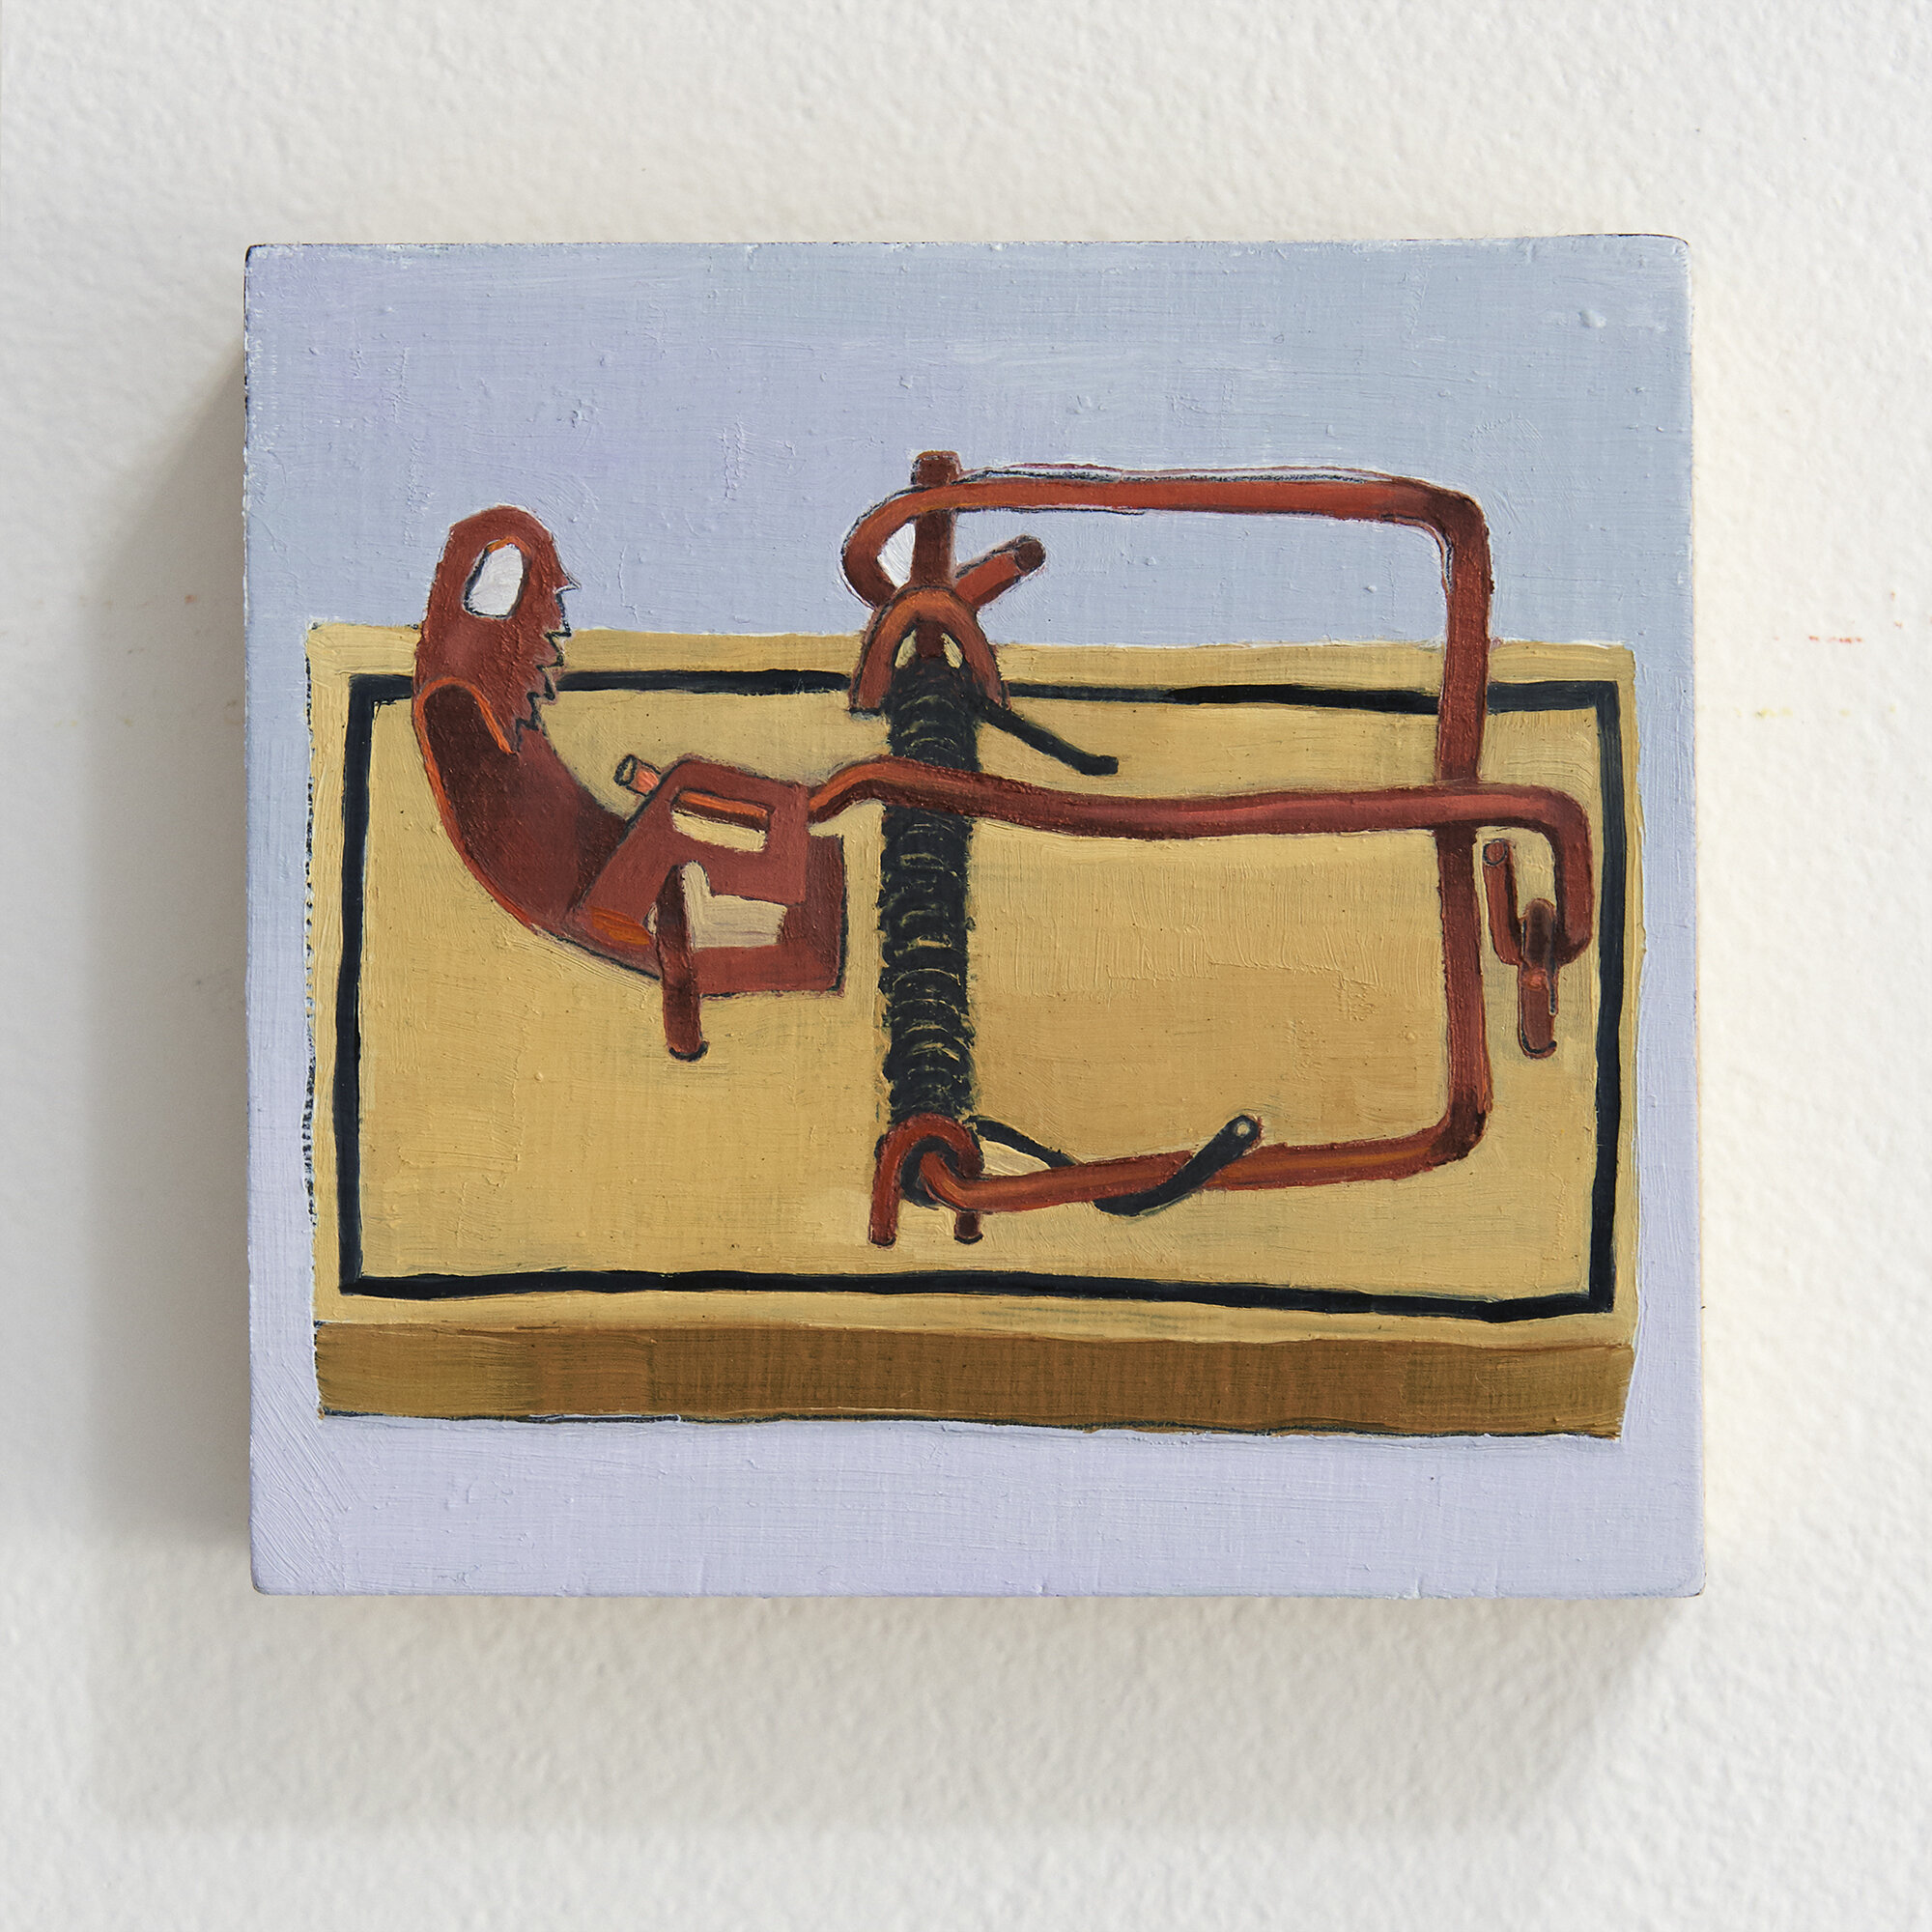  “Mousetrap Painting”, 4” x 4.5”, oil on panel, 2018 